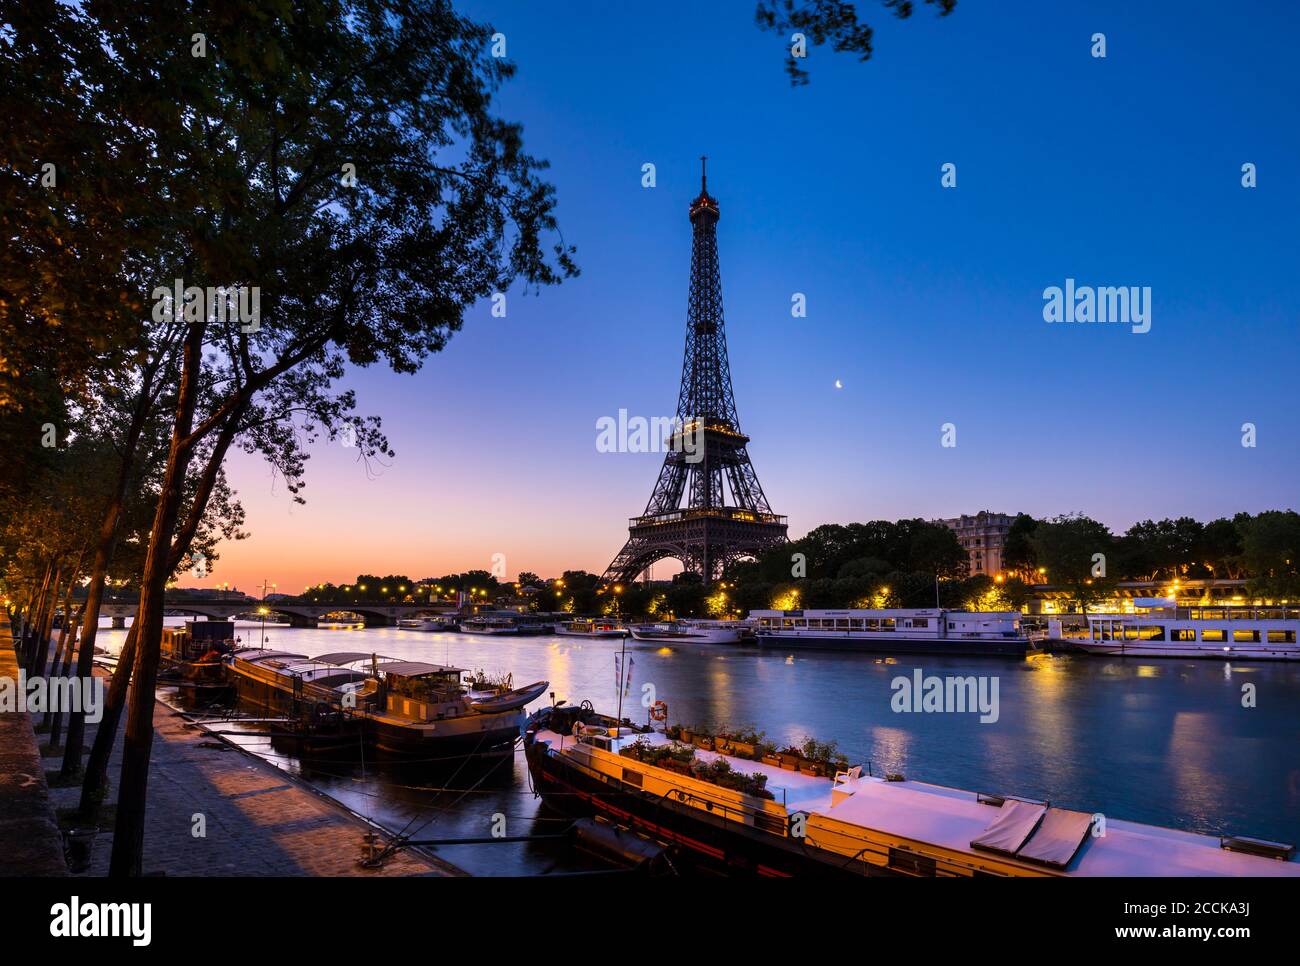 Eiffel Tower by Seine river against clear blue sky at sunset, Paris, France Stock Photo